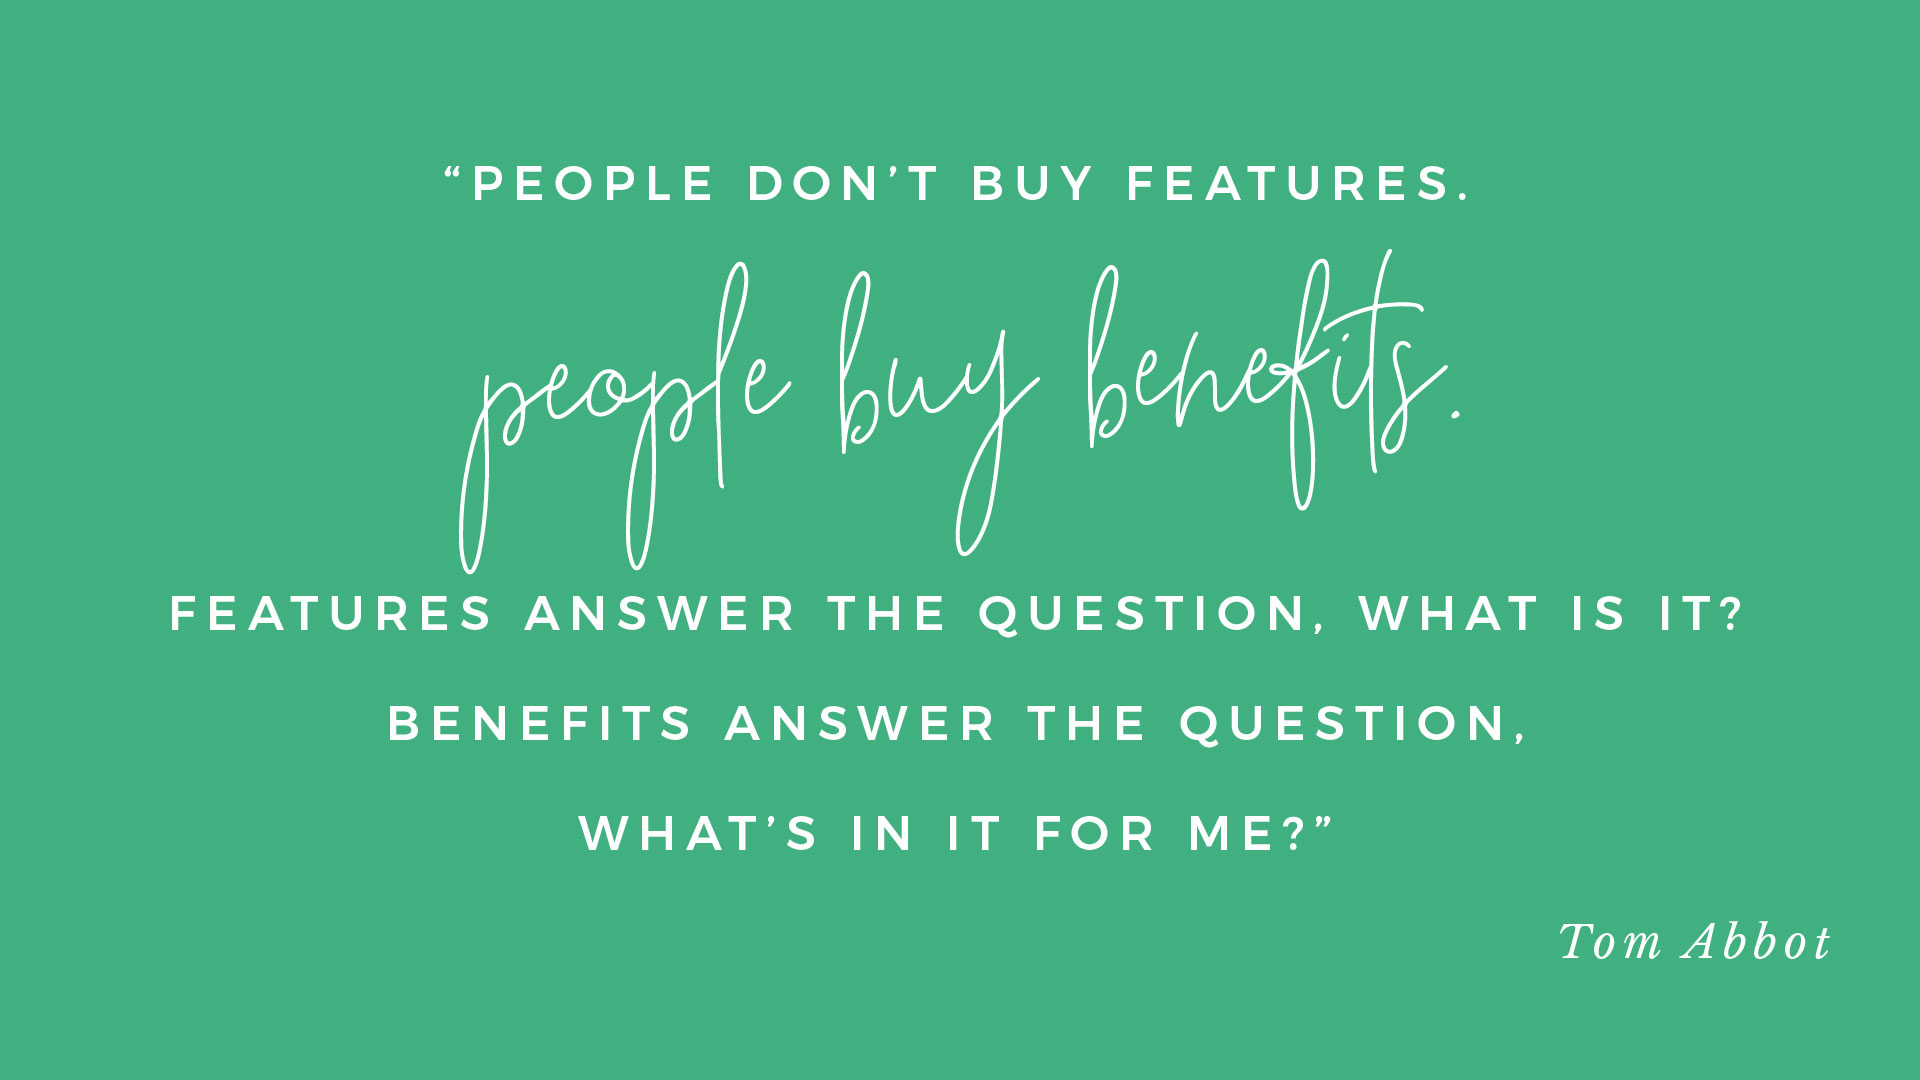 “People don’t buy features, they buy benefits. Features answer the question, what is it? Benefits answer the question, what’s in it for me?” Tom Abbot